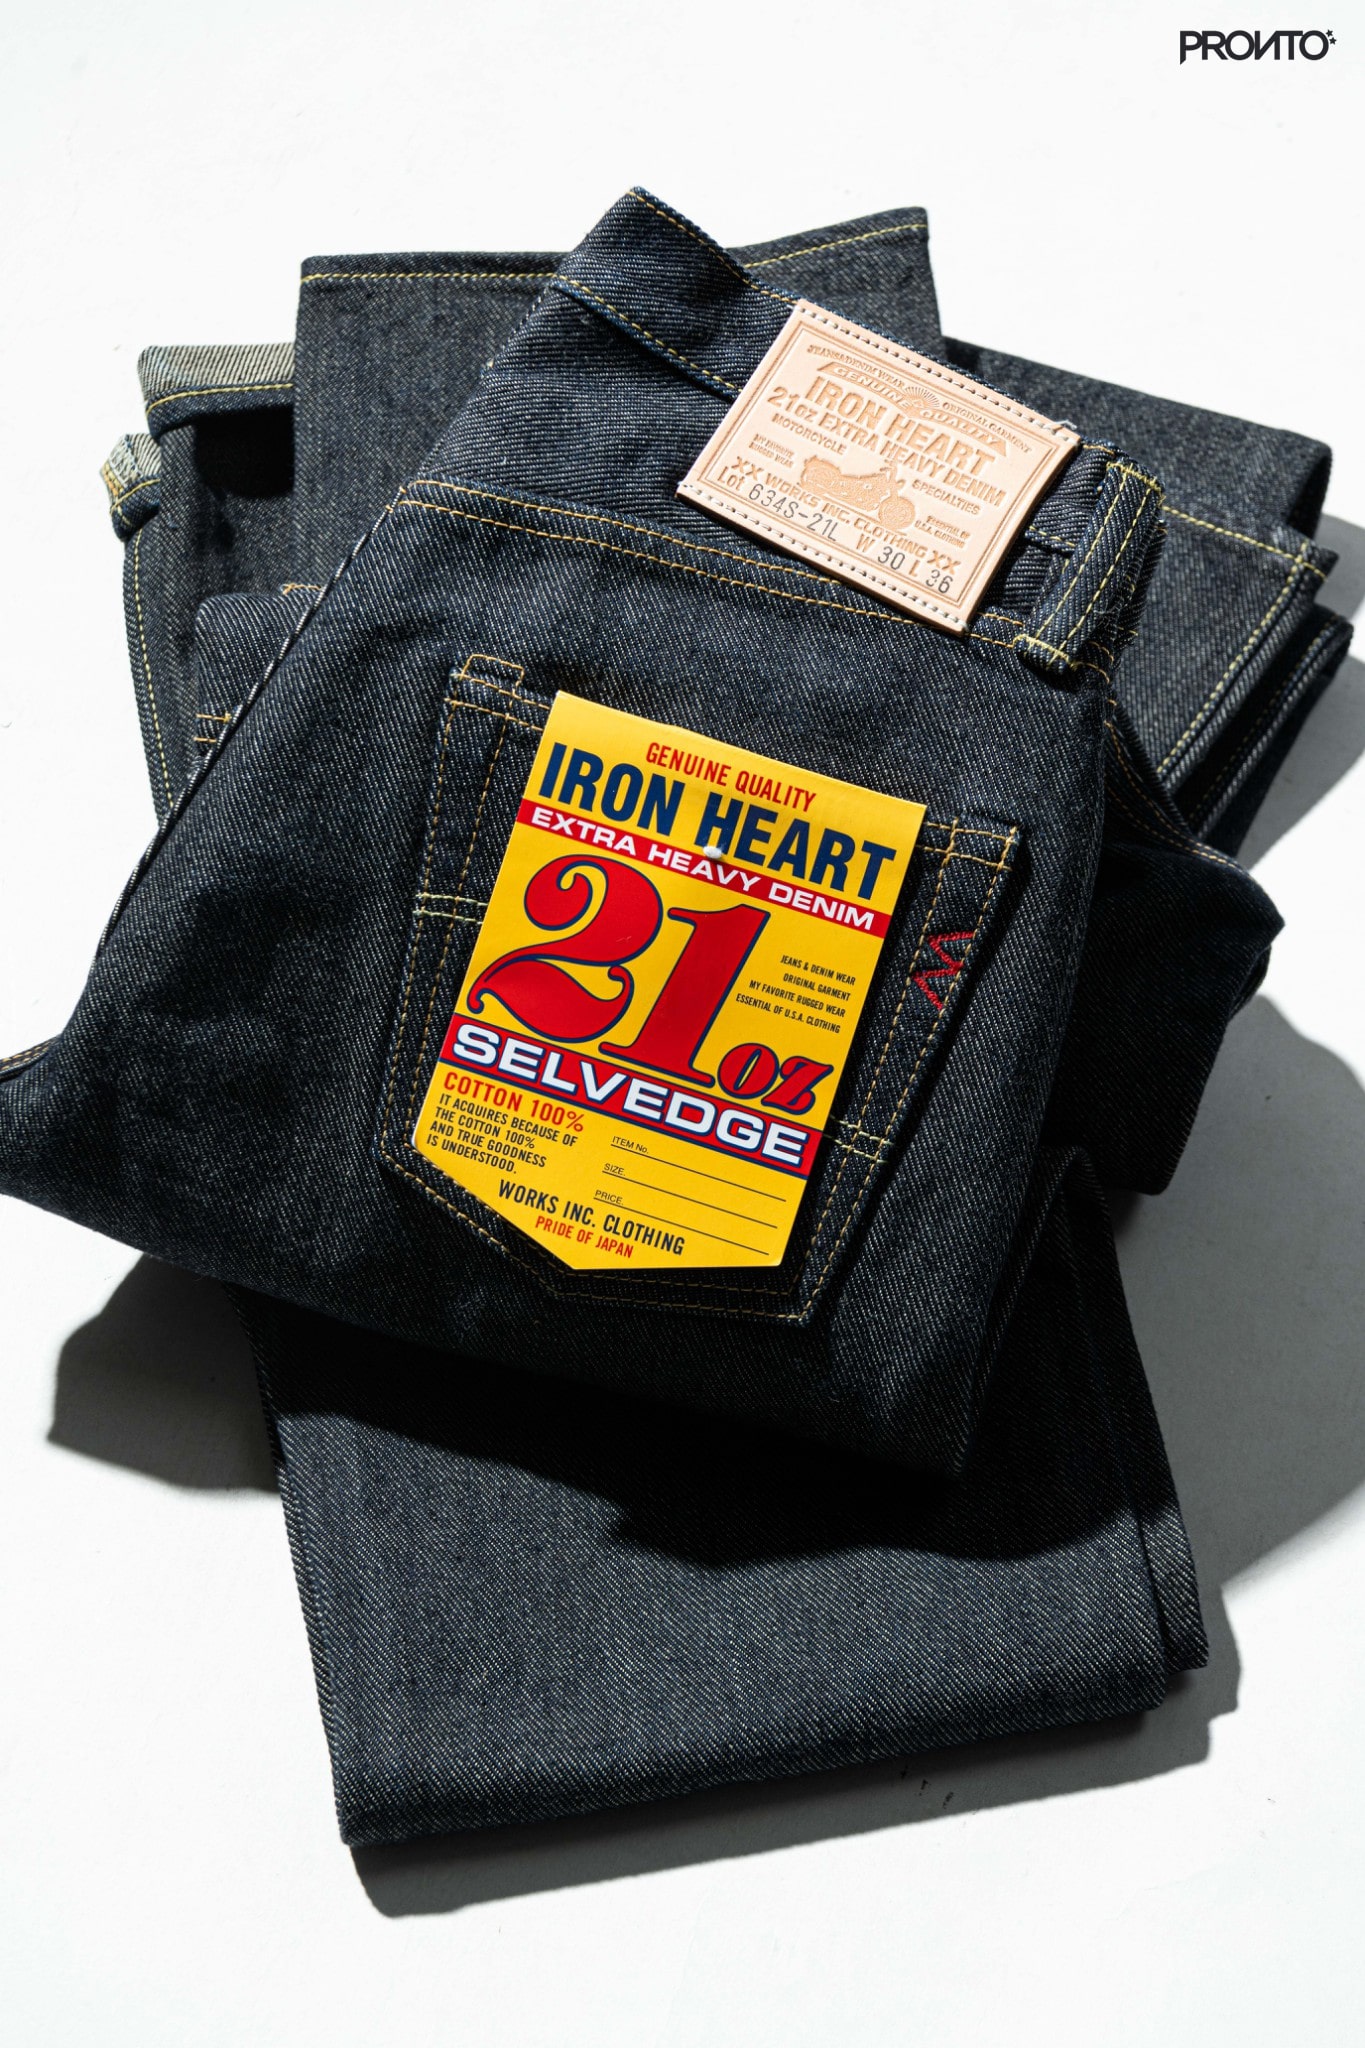 NEW ARRIVAL : IRON HEART